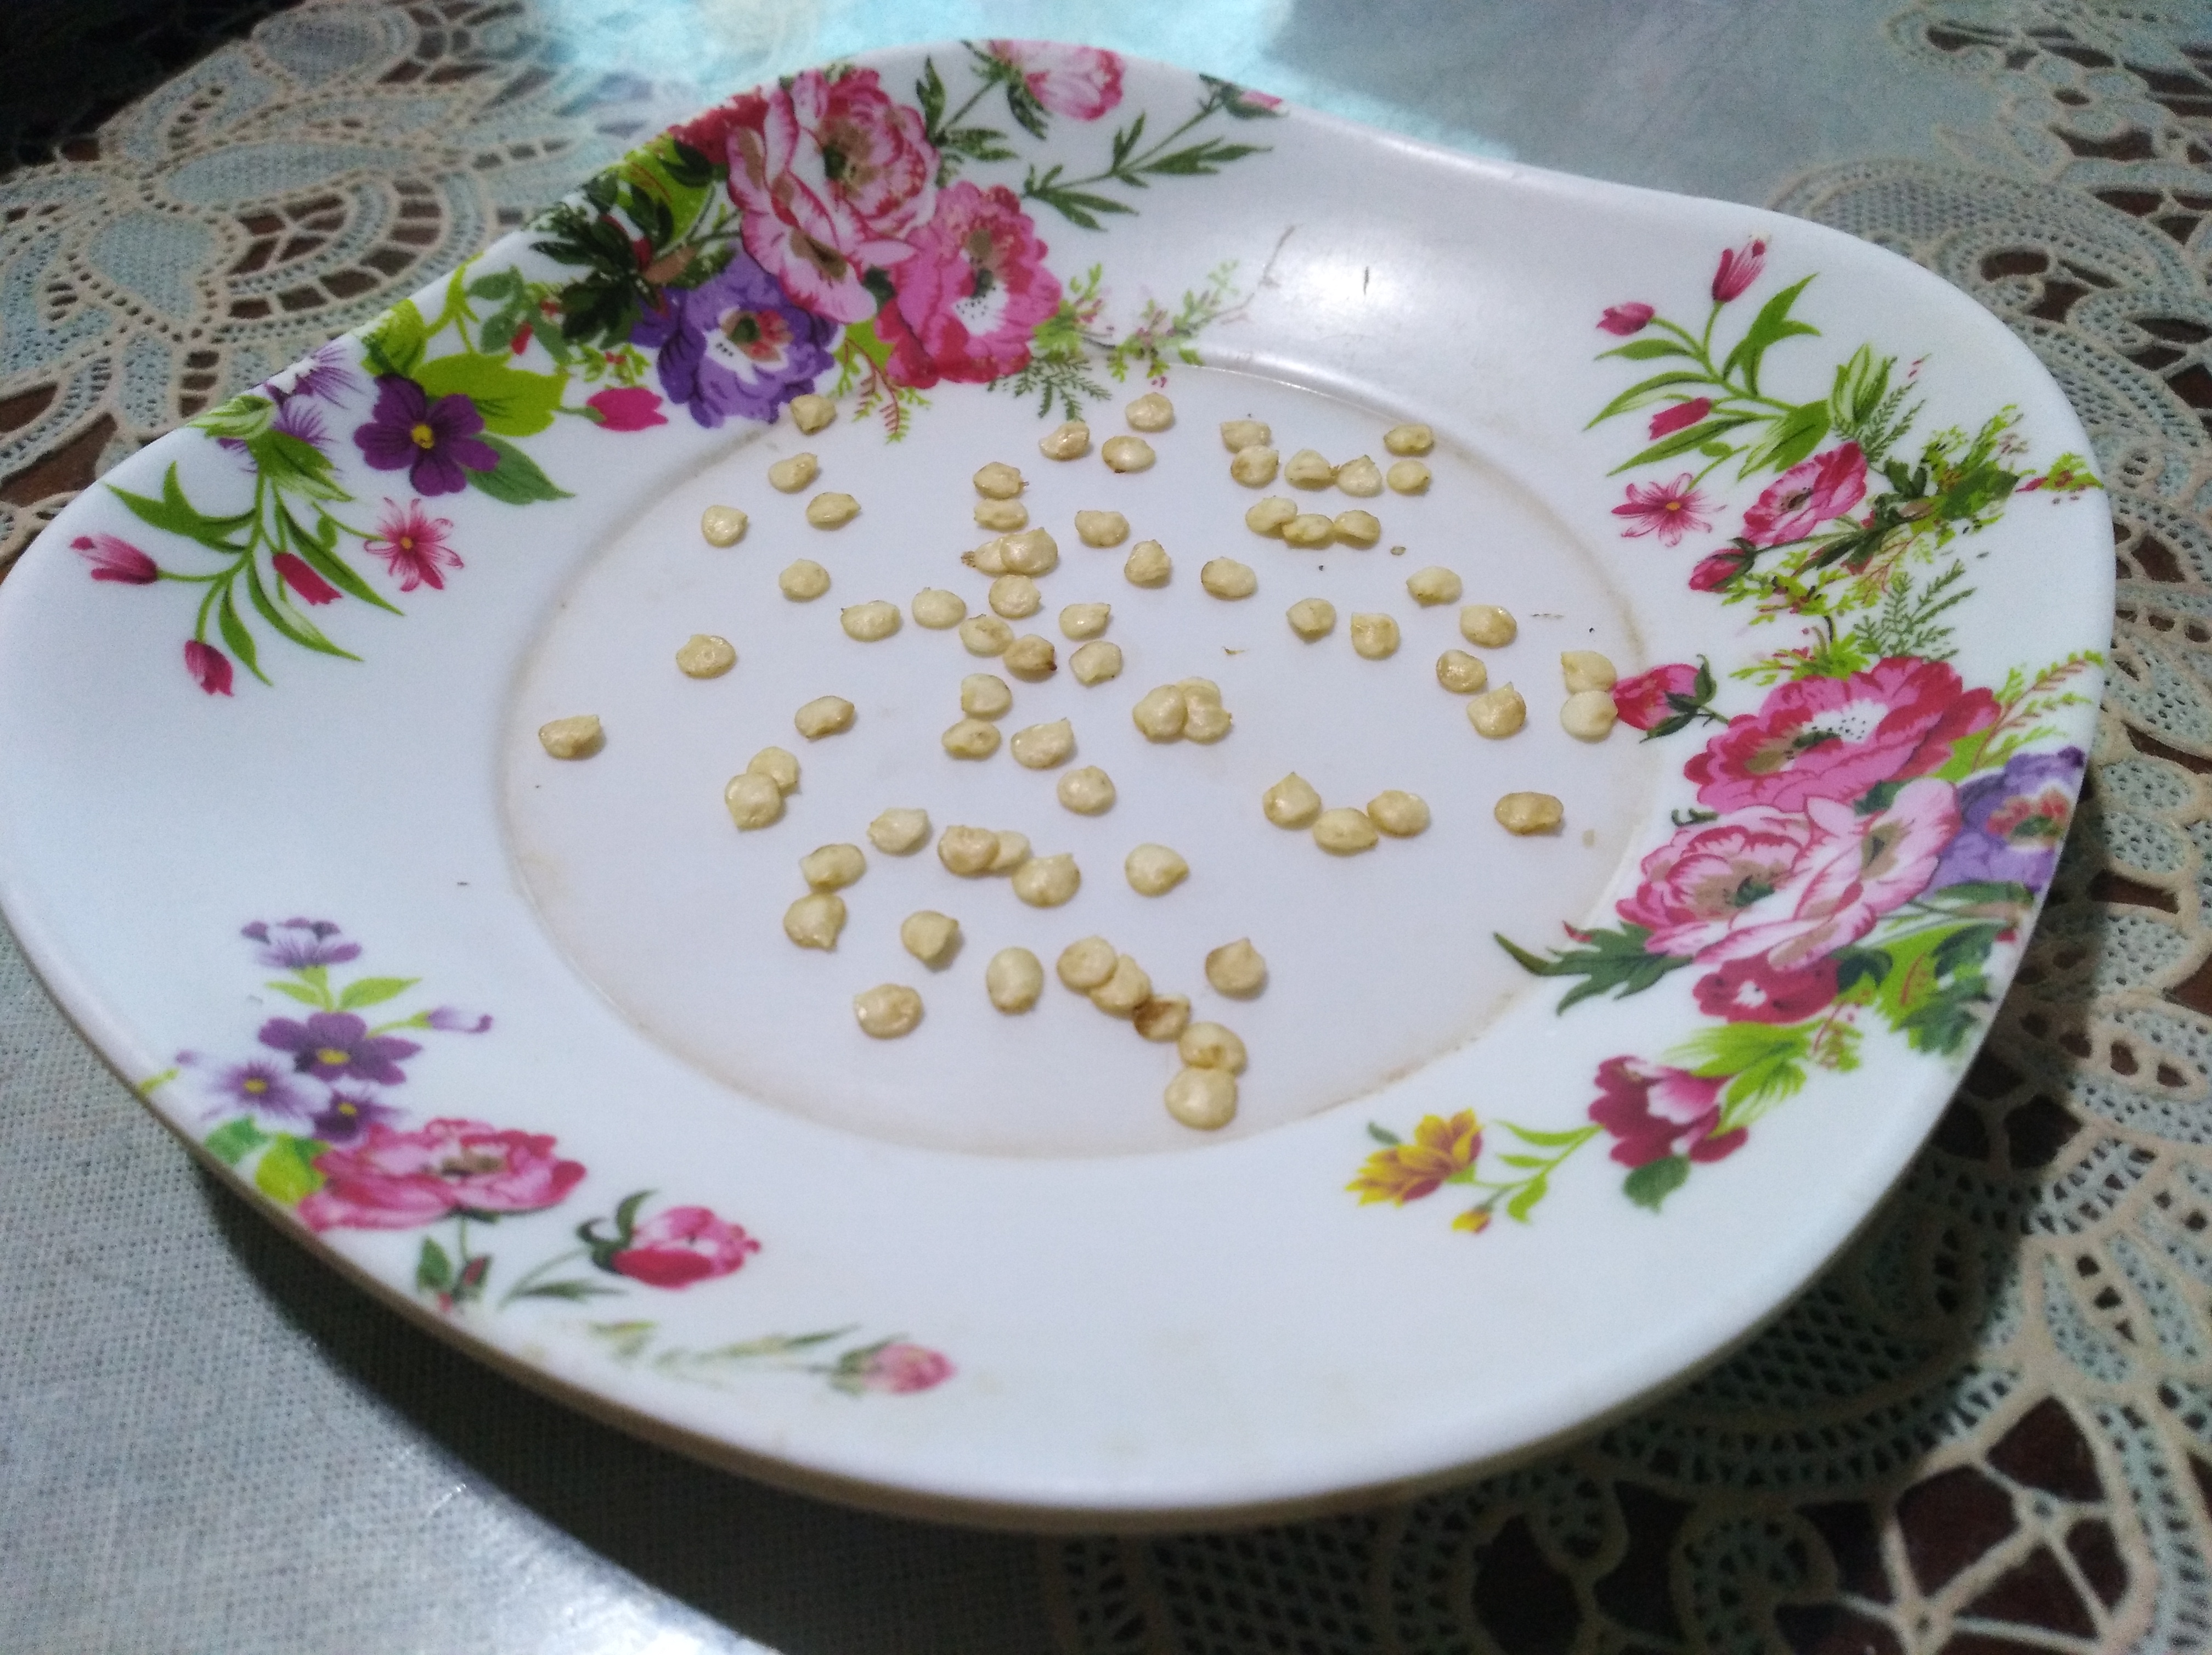 Pepper seeds drying on a flower-decorated plate